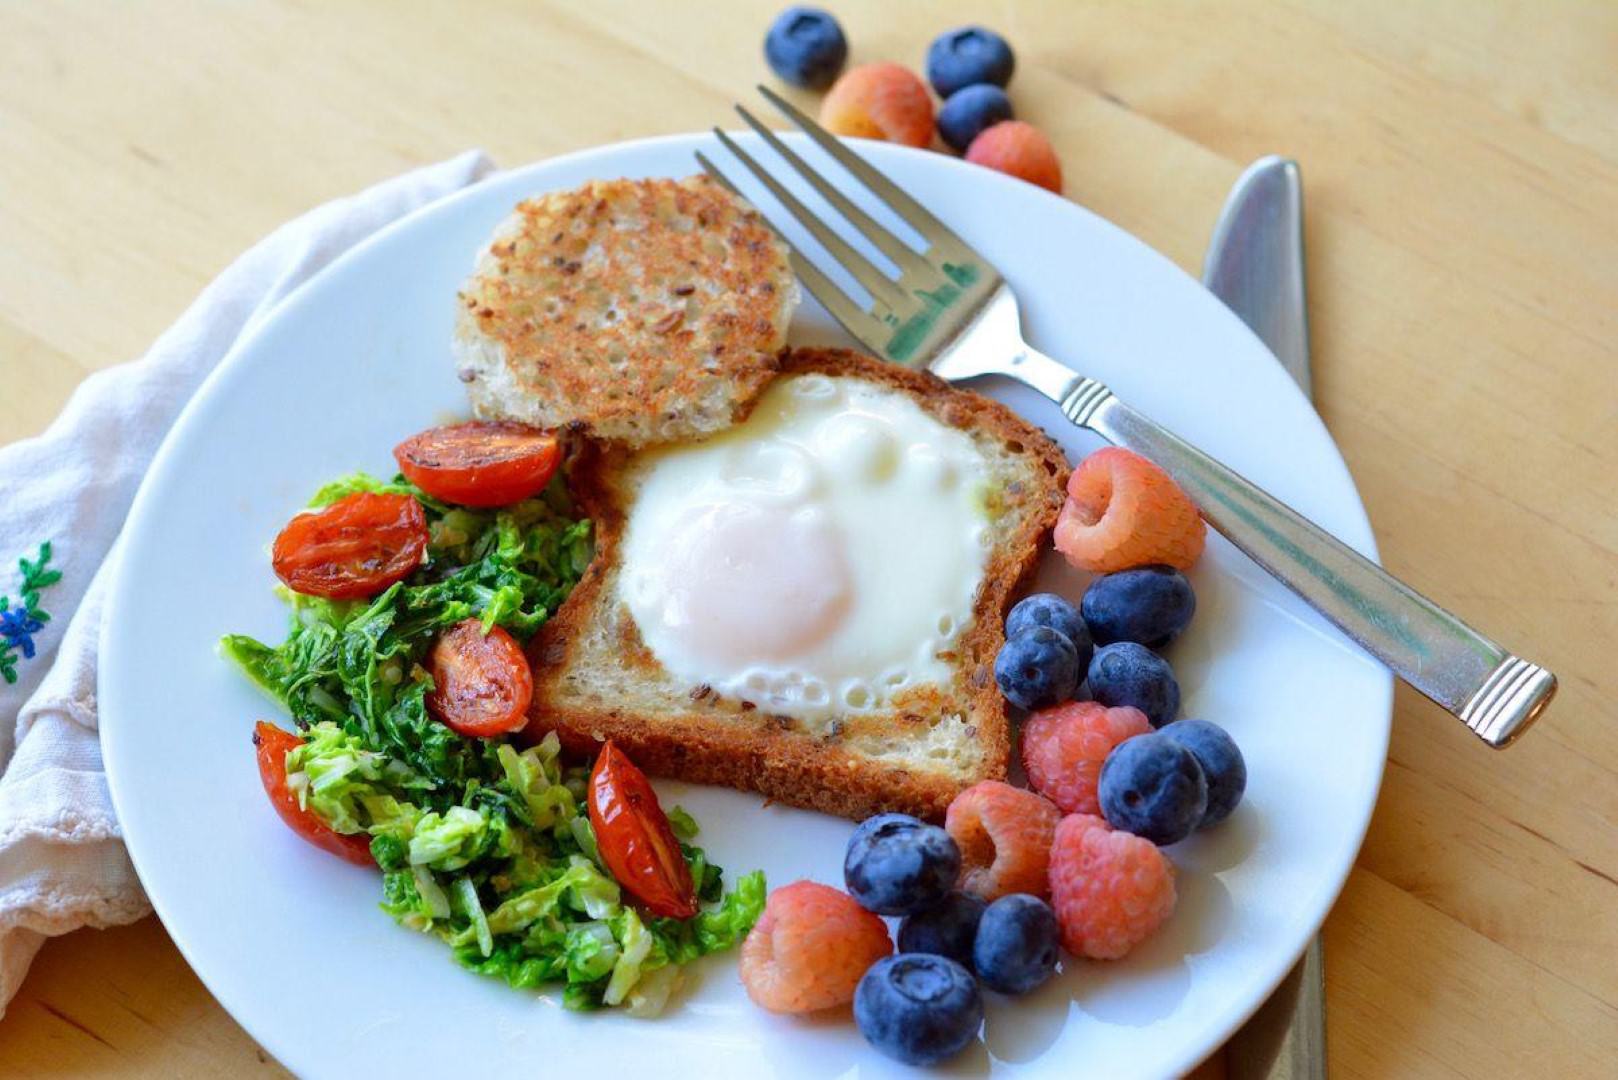 Looking for a Healthy Gluten Free Breakfast? Try Egg in a Hole - Three Bakers